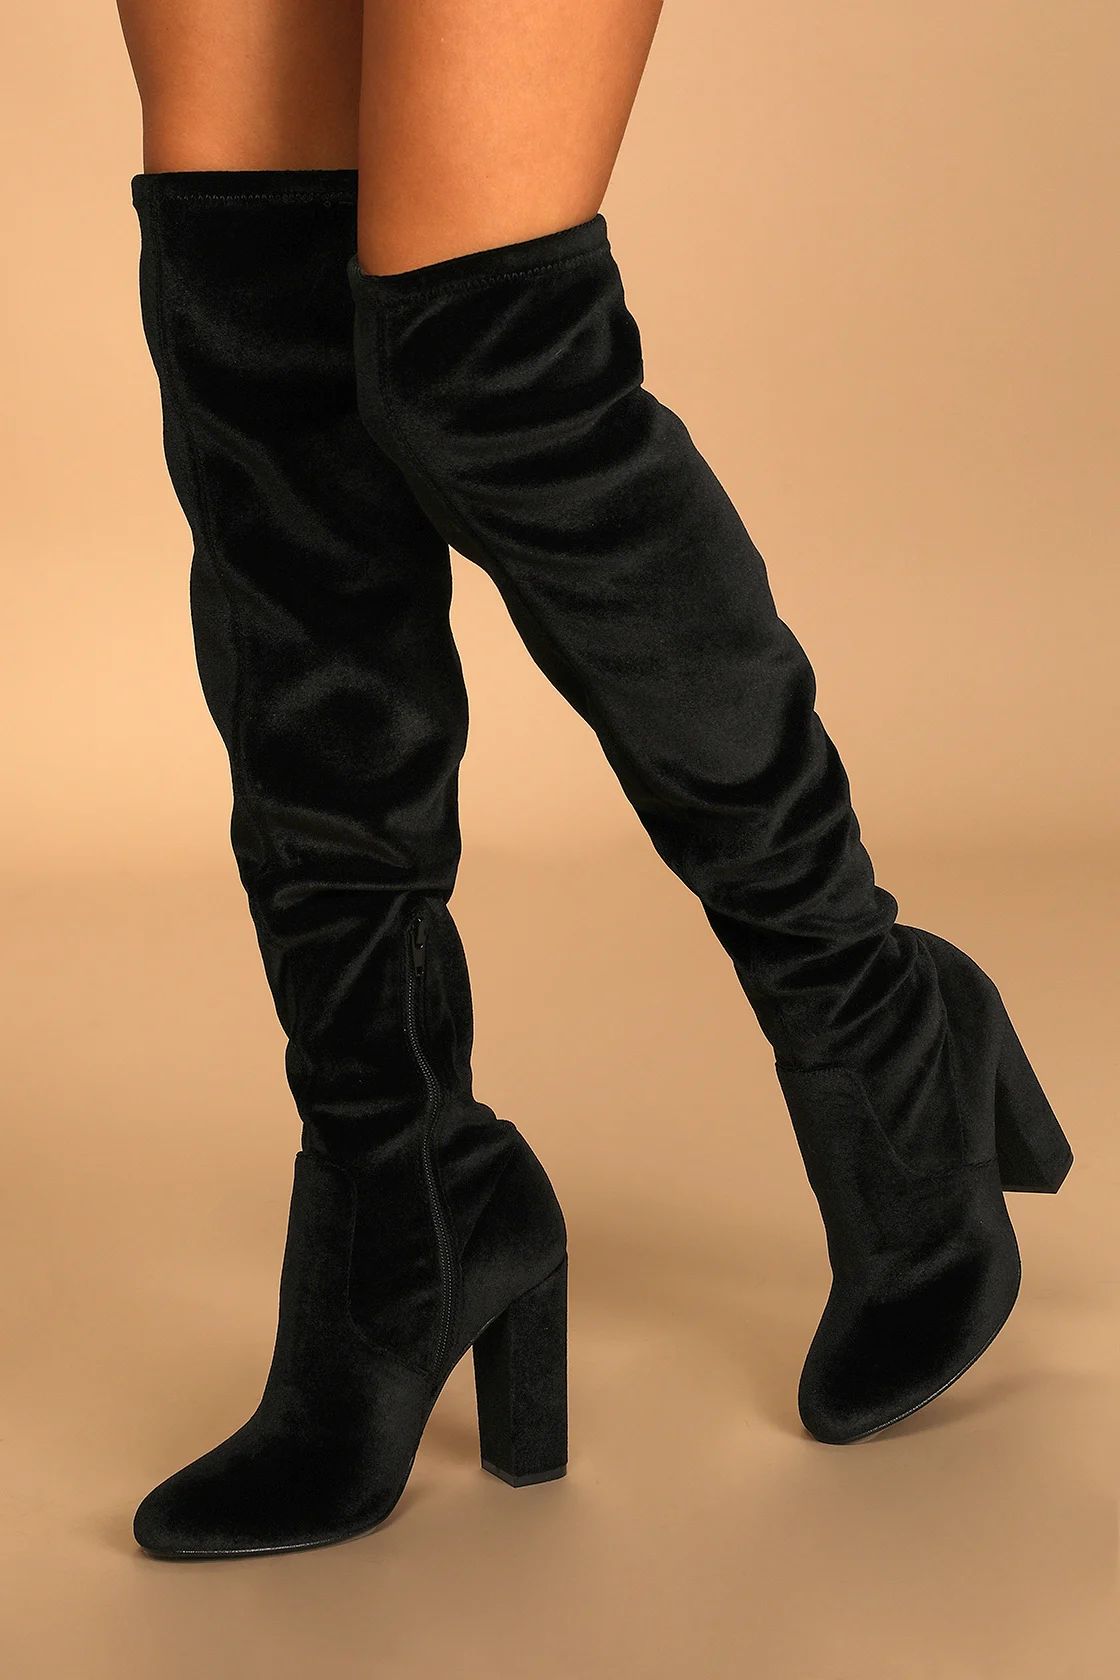 Linzy Black Suede Over the Knee Boots | Lulus (US)